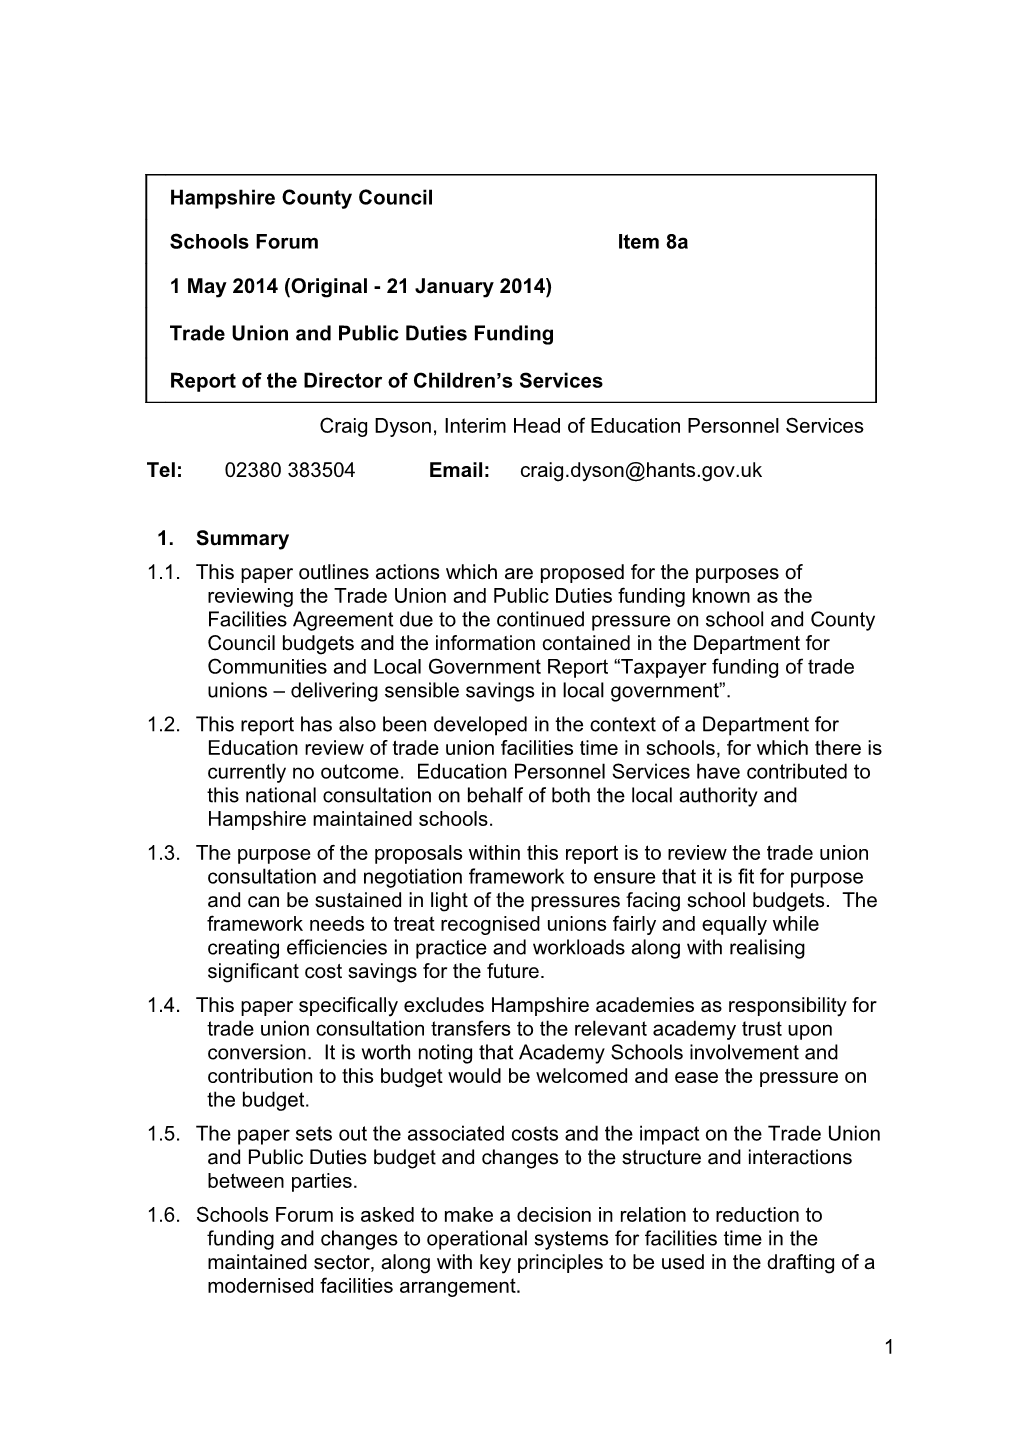 1.1. This Paper Outlines Actions Which Are Proposed for the Purposes of Reviewing the Trade